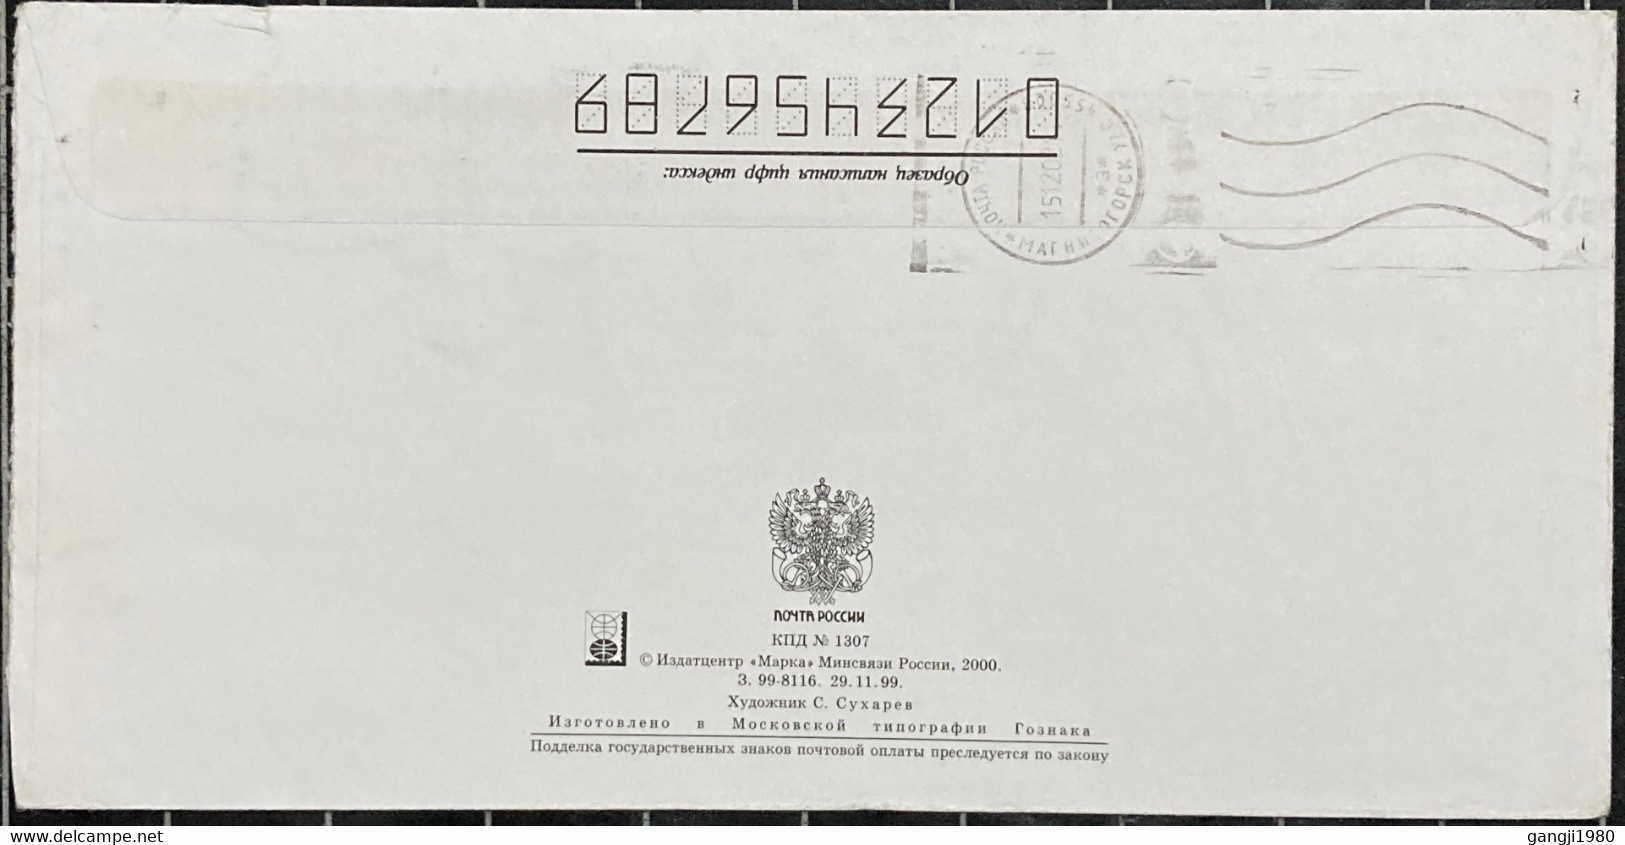 RUSSIA 2002, STATIONERY COVER USED TO GERMANY,RETURN TO SENDER LABEL,RAILWAY, BUILDING, MAGNITOGORSK TOWN CANCEL - Lettres & Documents